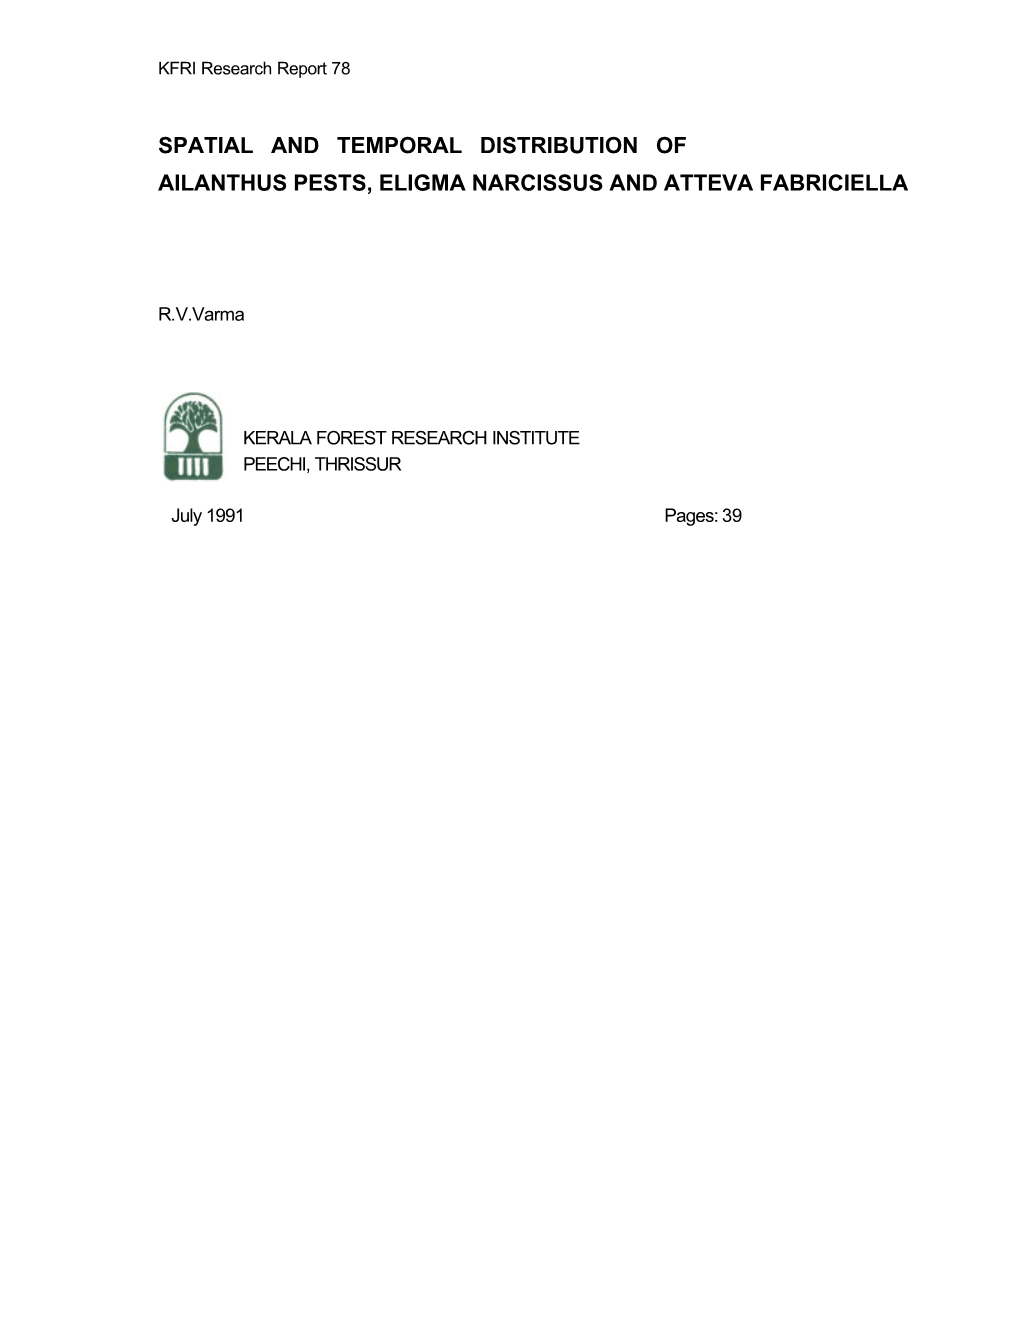 Spatial and Temporal Distribution of Ailanthus Pests, Eligma Narcissus and Atteva Fabriciella